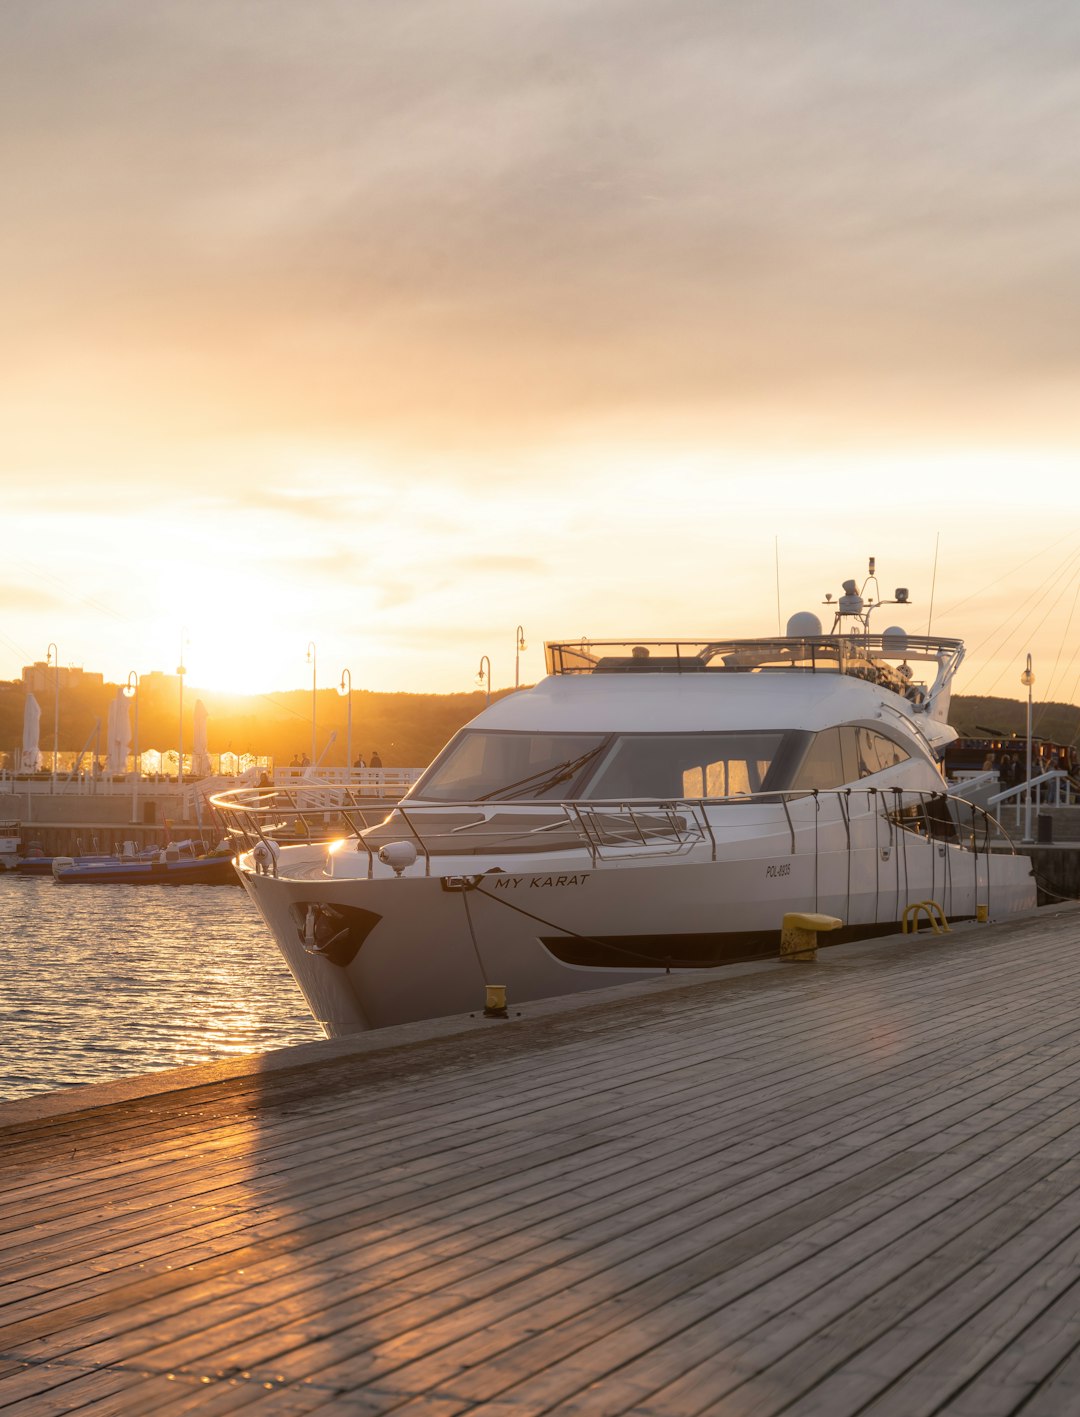 white and black yacht on dock during sunset